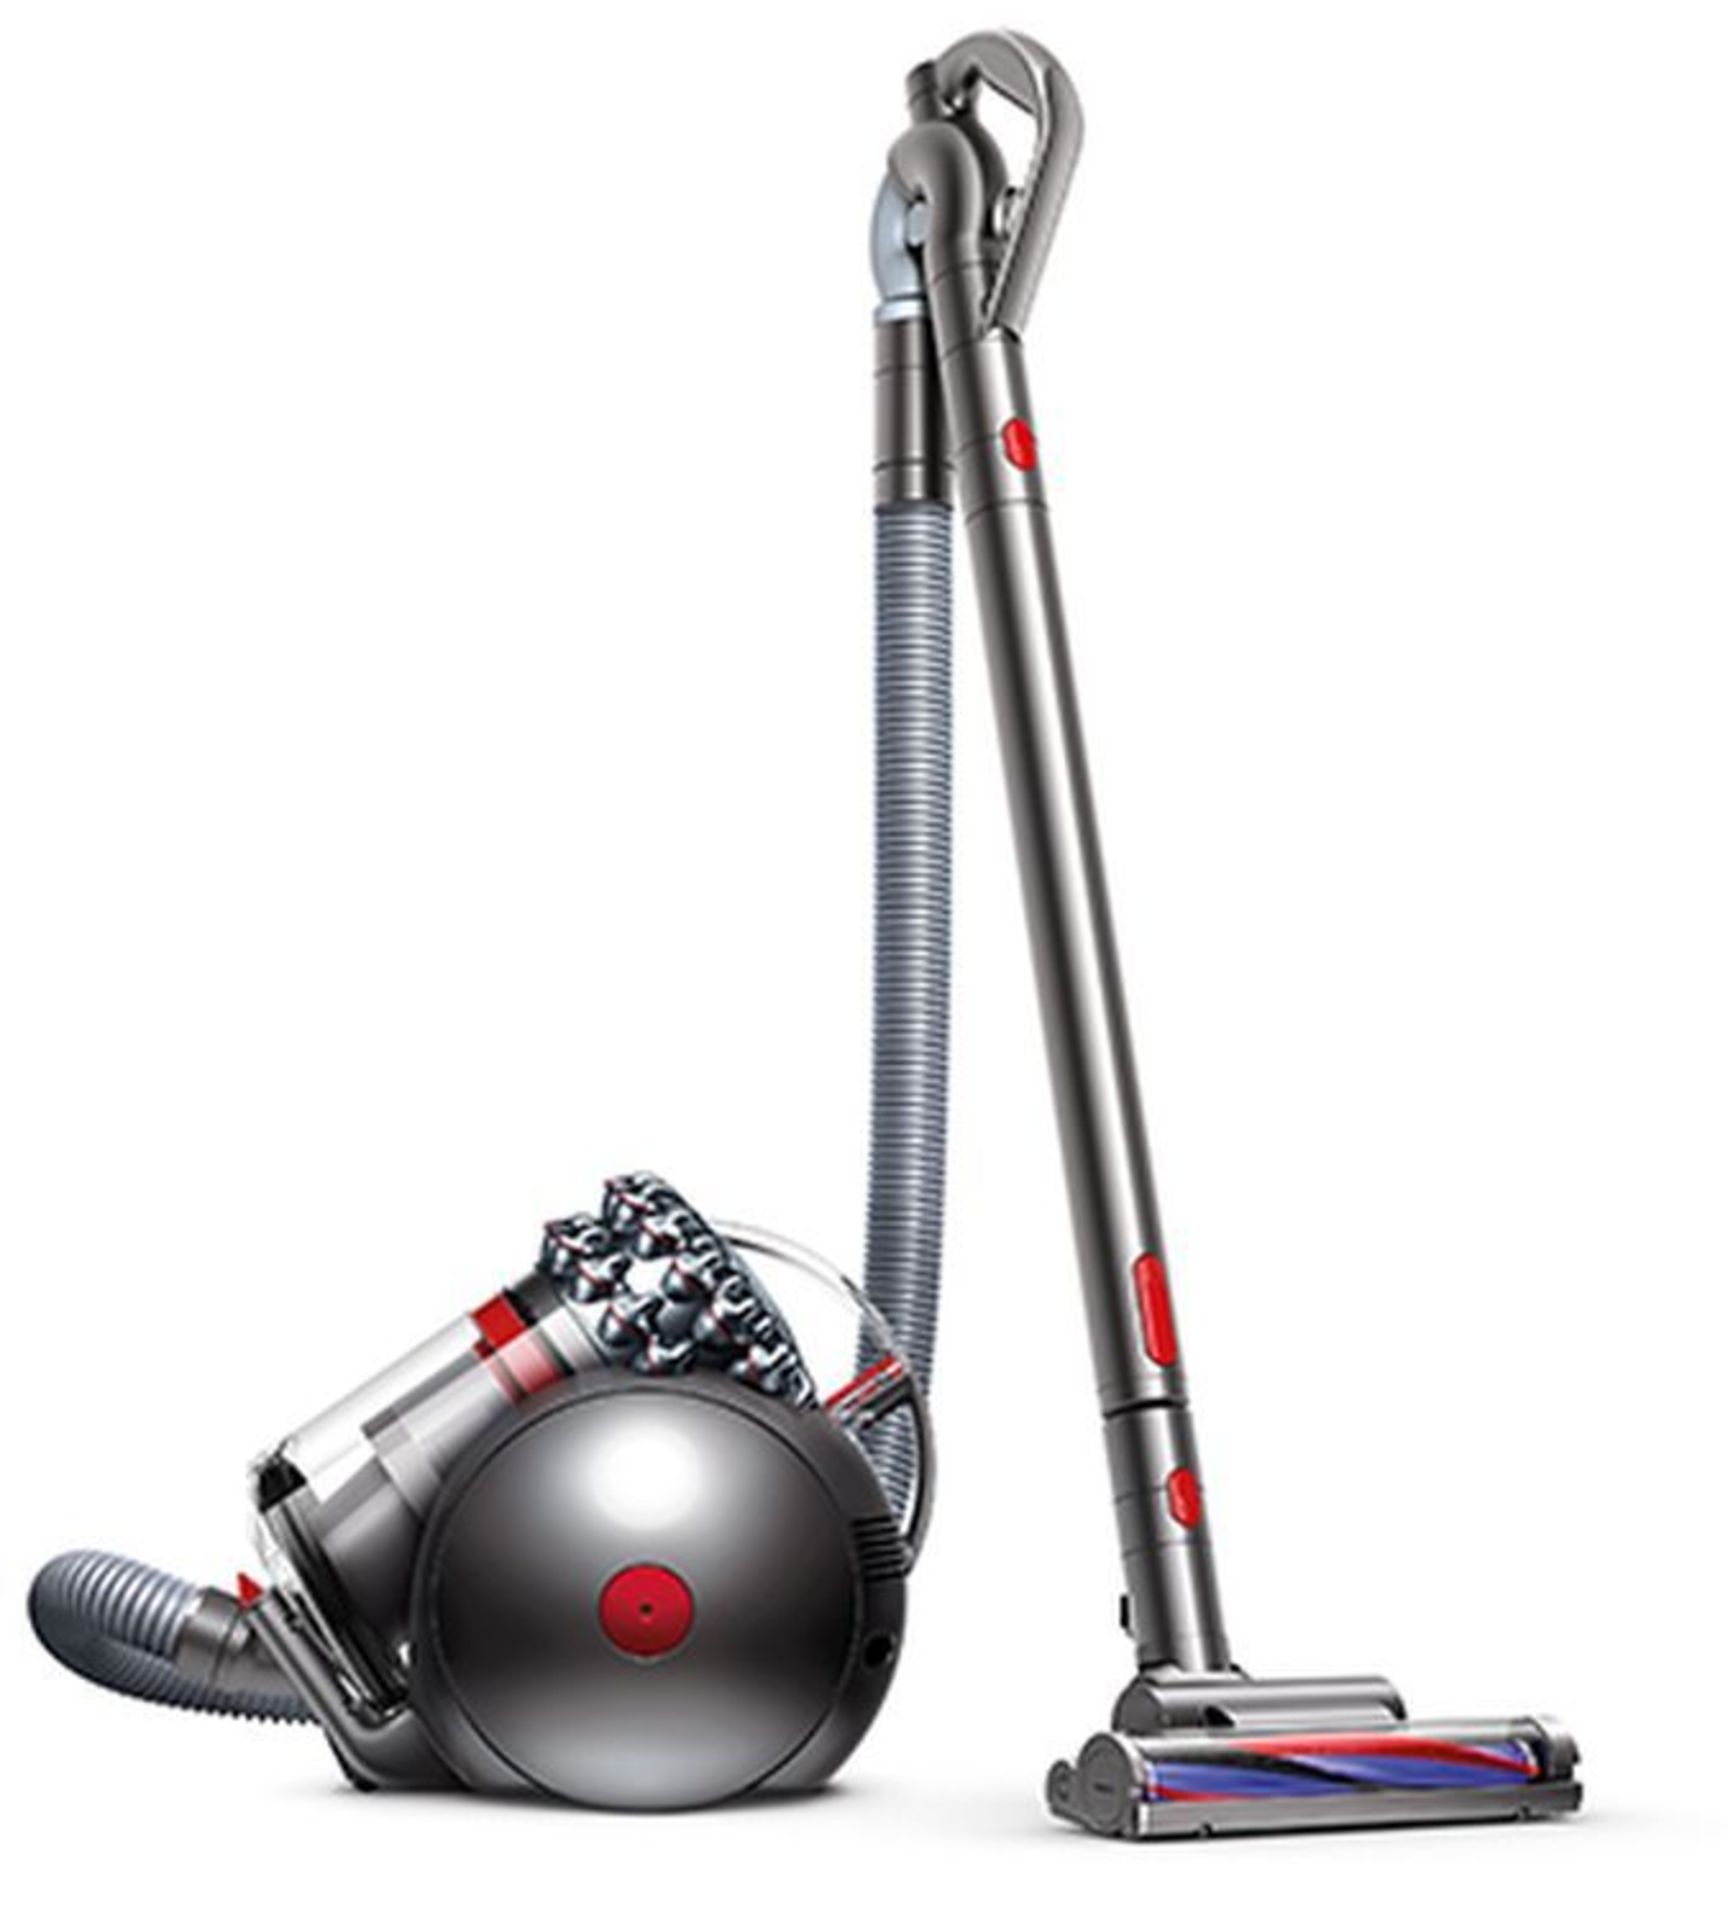 V Brand New Dyson Cinetic Big Ball Animal+ Vacuum Cleaner NO Filters NO Bags - Self Righting -